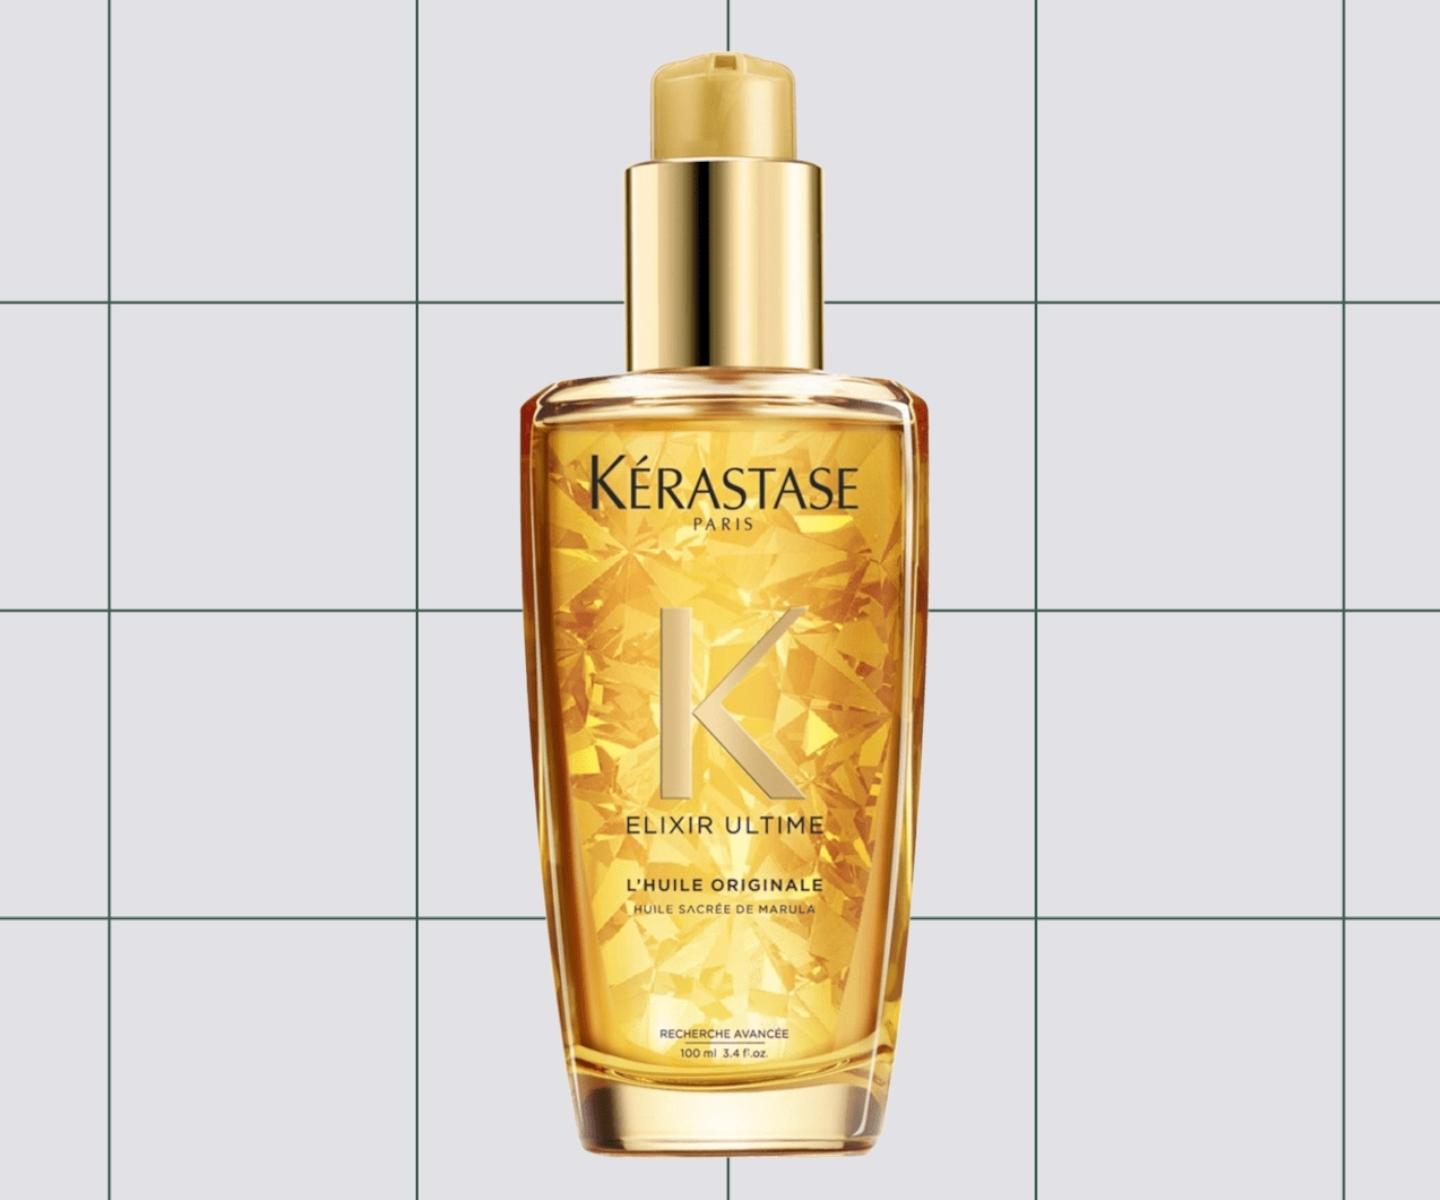 shabby hastighed fordrejer The Top 10 Best-Selling Kérastase Hair Products on Adore Beauty Right Now